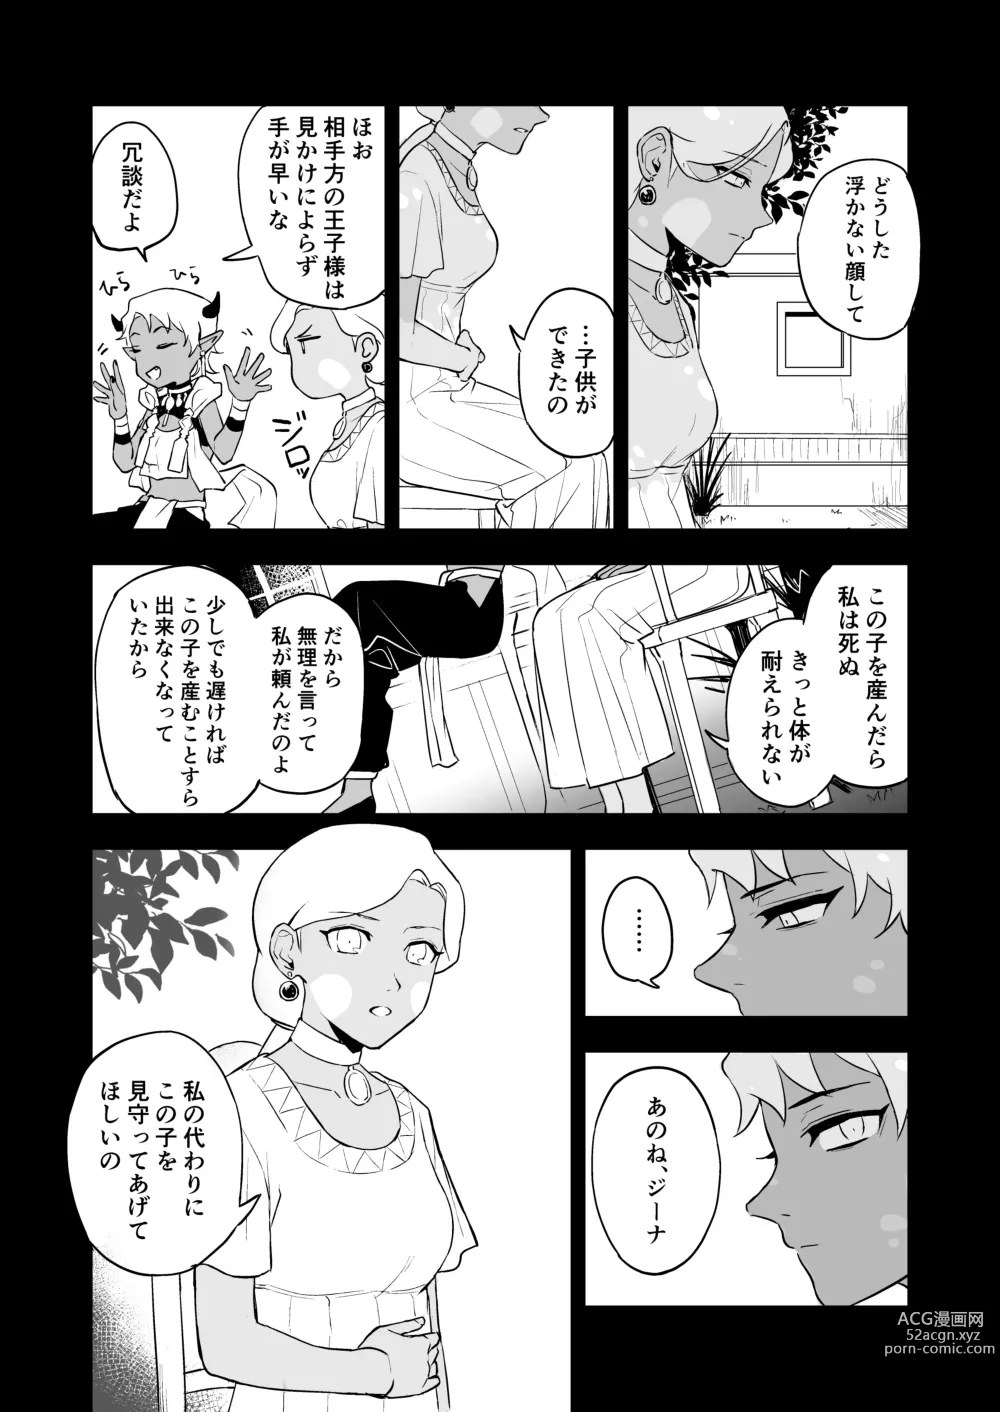 Page 32 of doujinshi INCUBUS LAMP